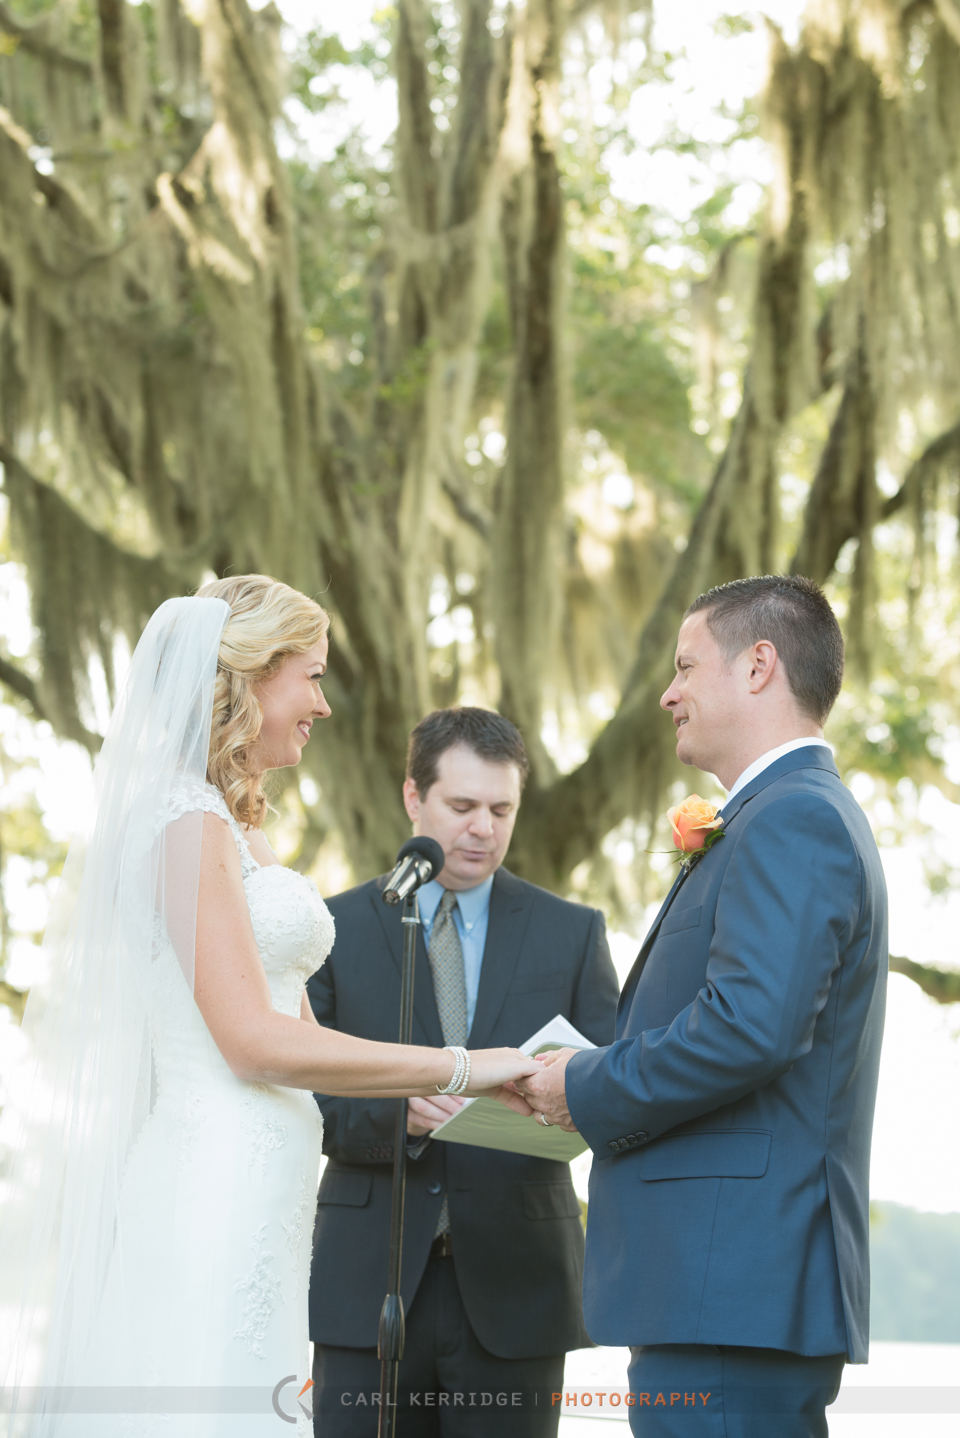 Bridal ceremony at Wachesaw Plantation under the live oaks and spanish moss